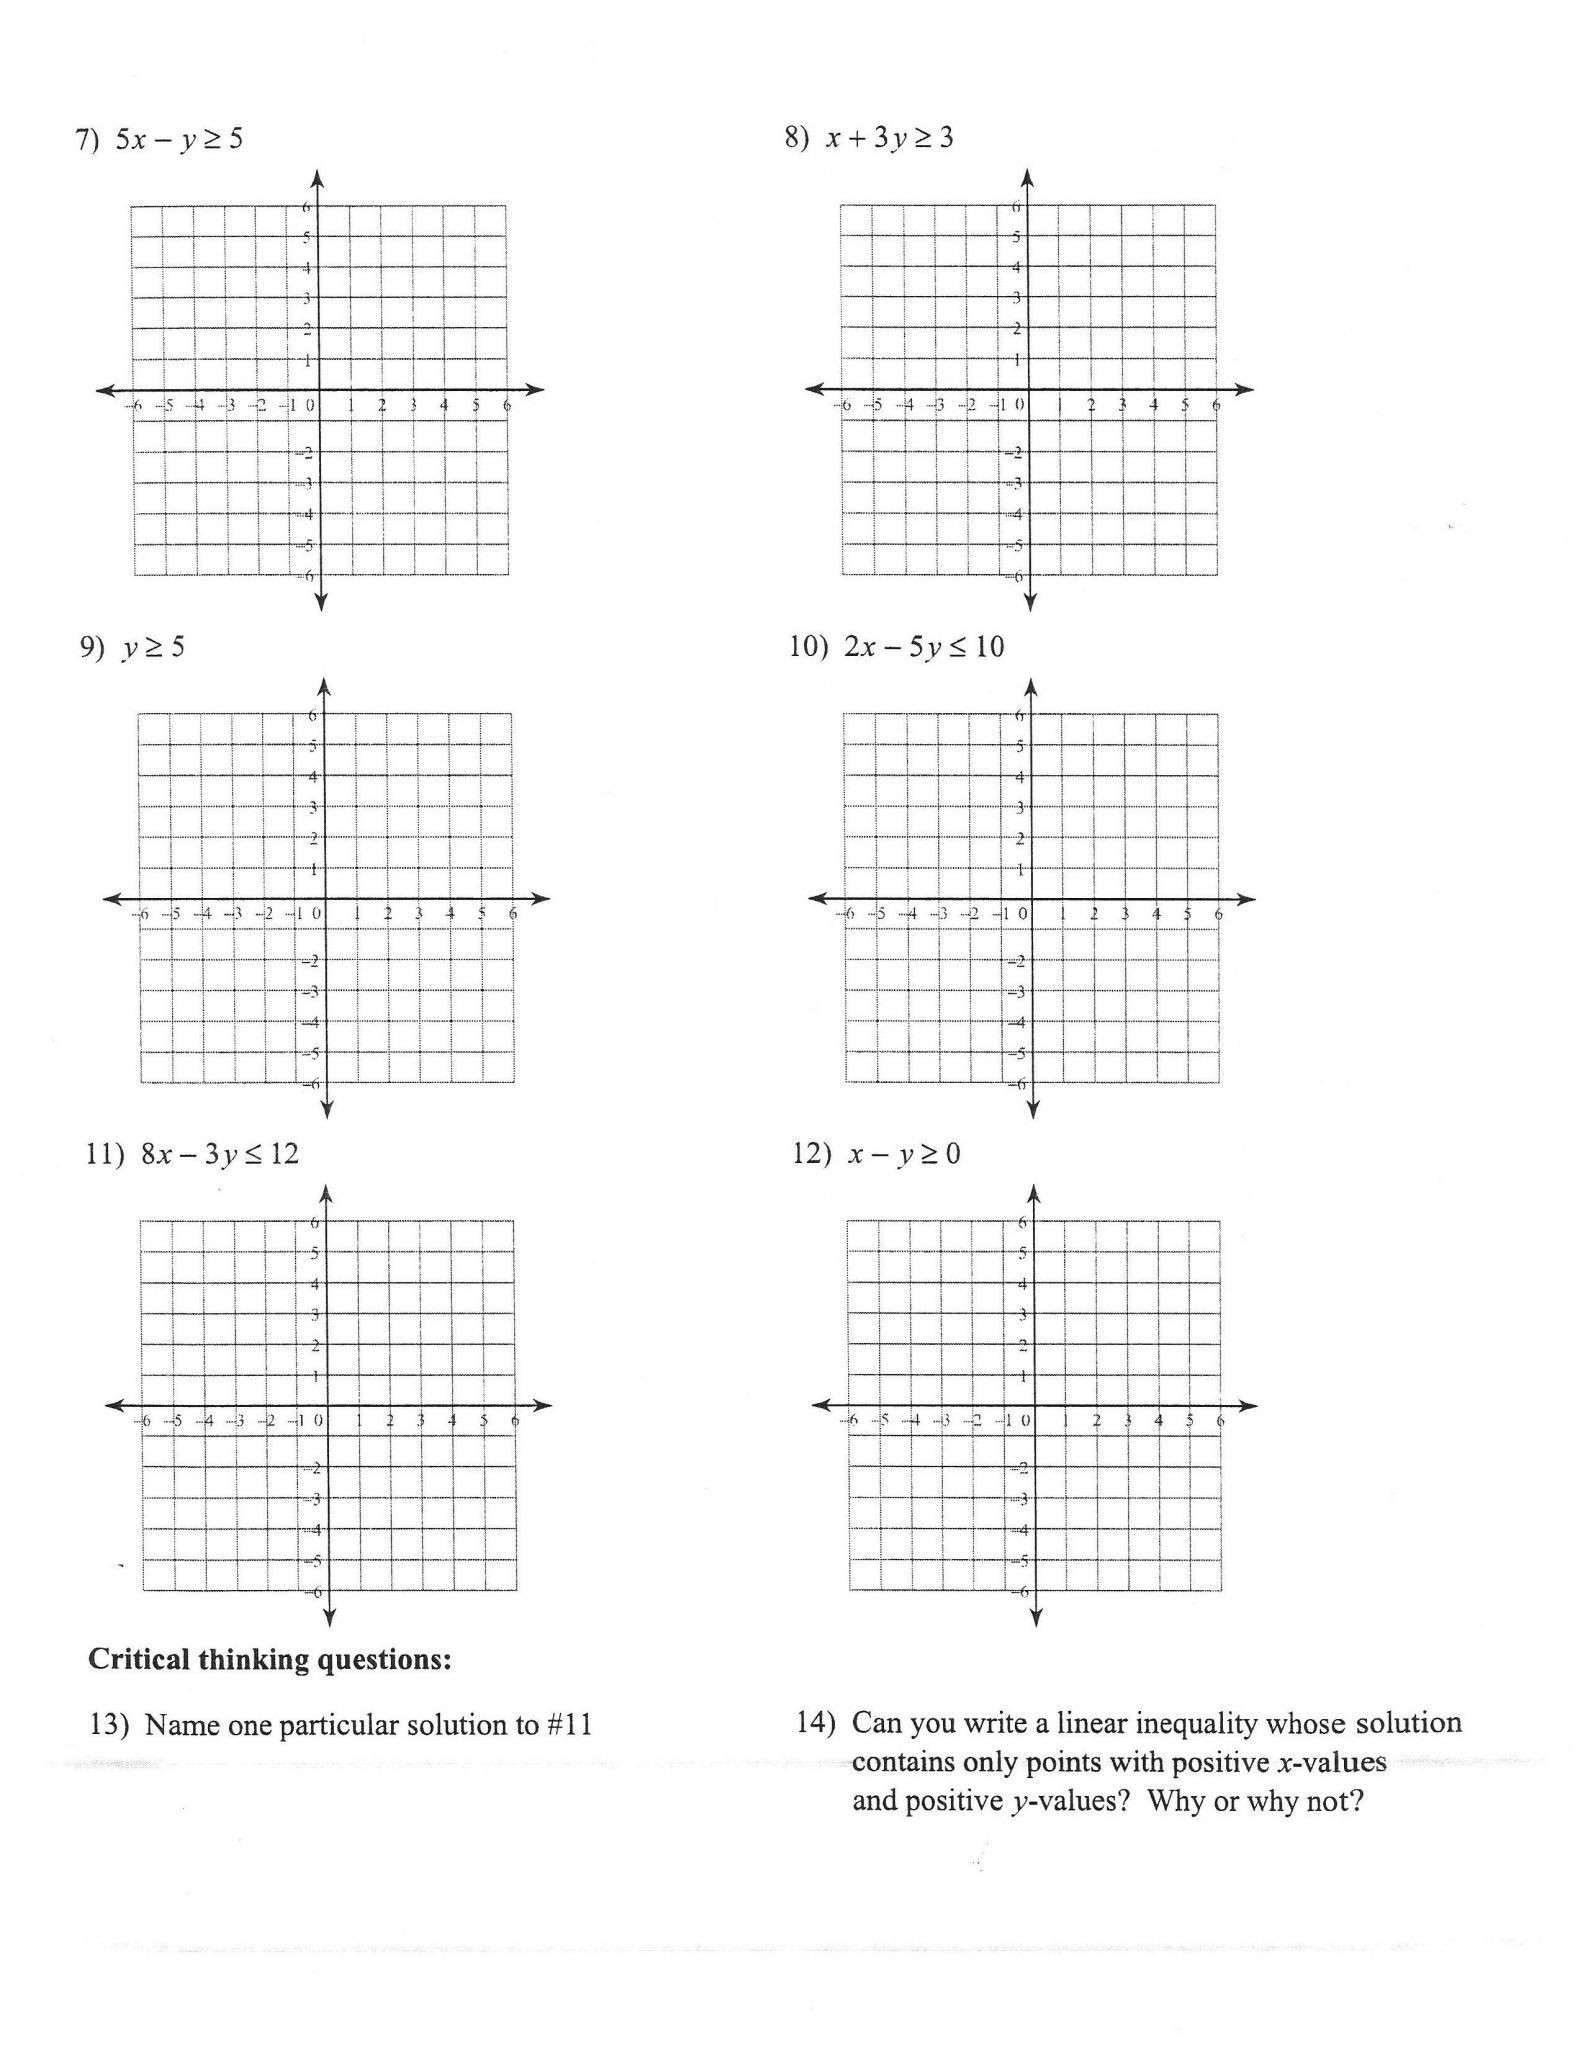 Writing Linear Equations Worksheet Answers Worksheets 49 Splendi Graphing Linear Equations Worksheet